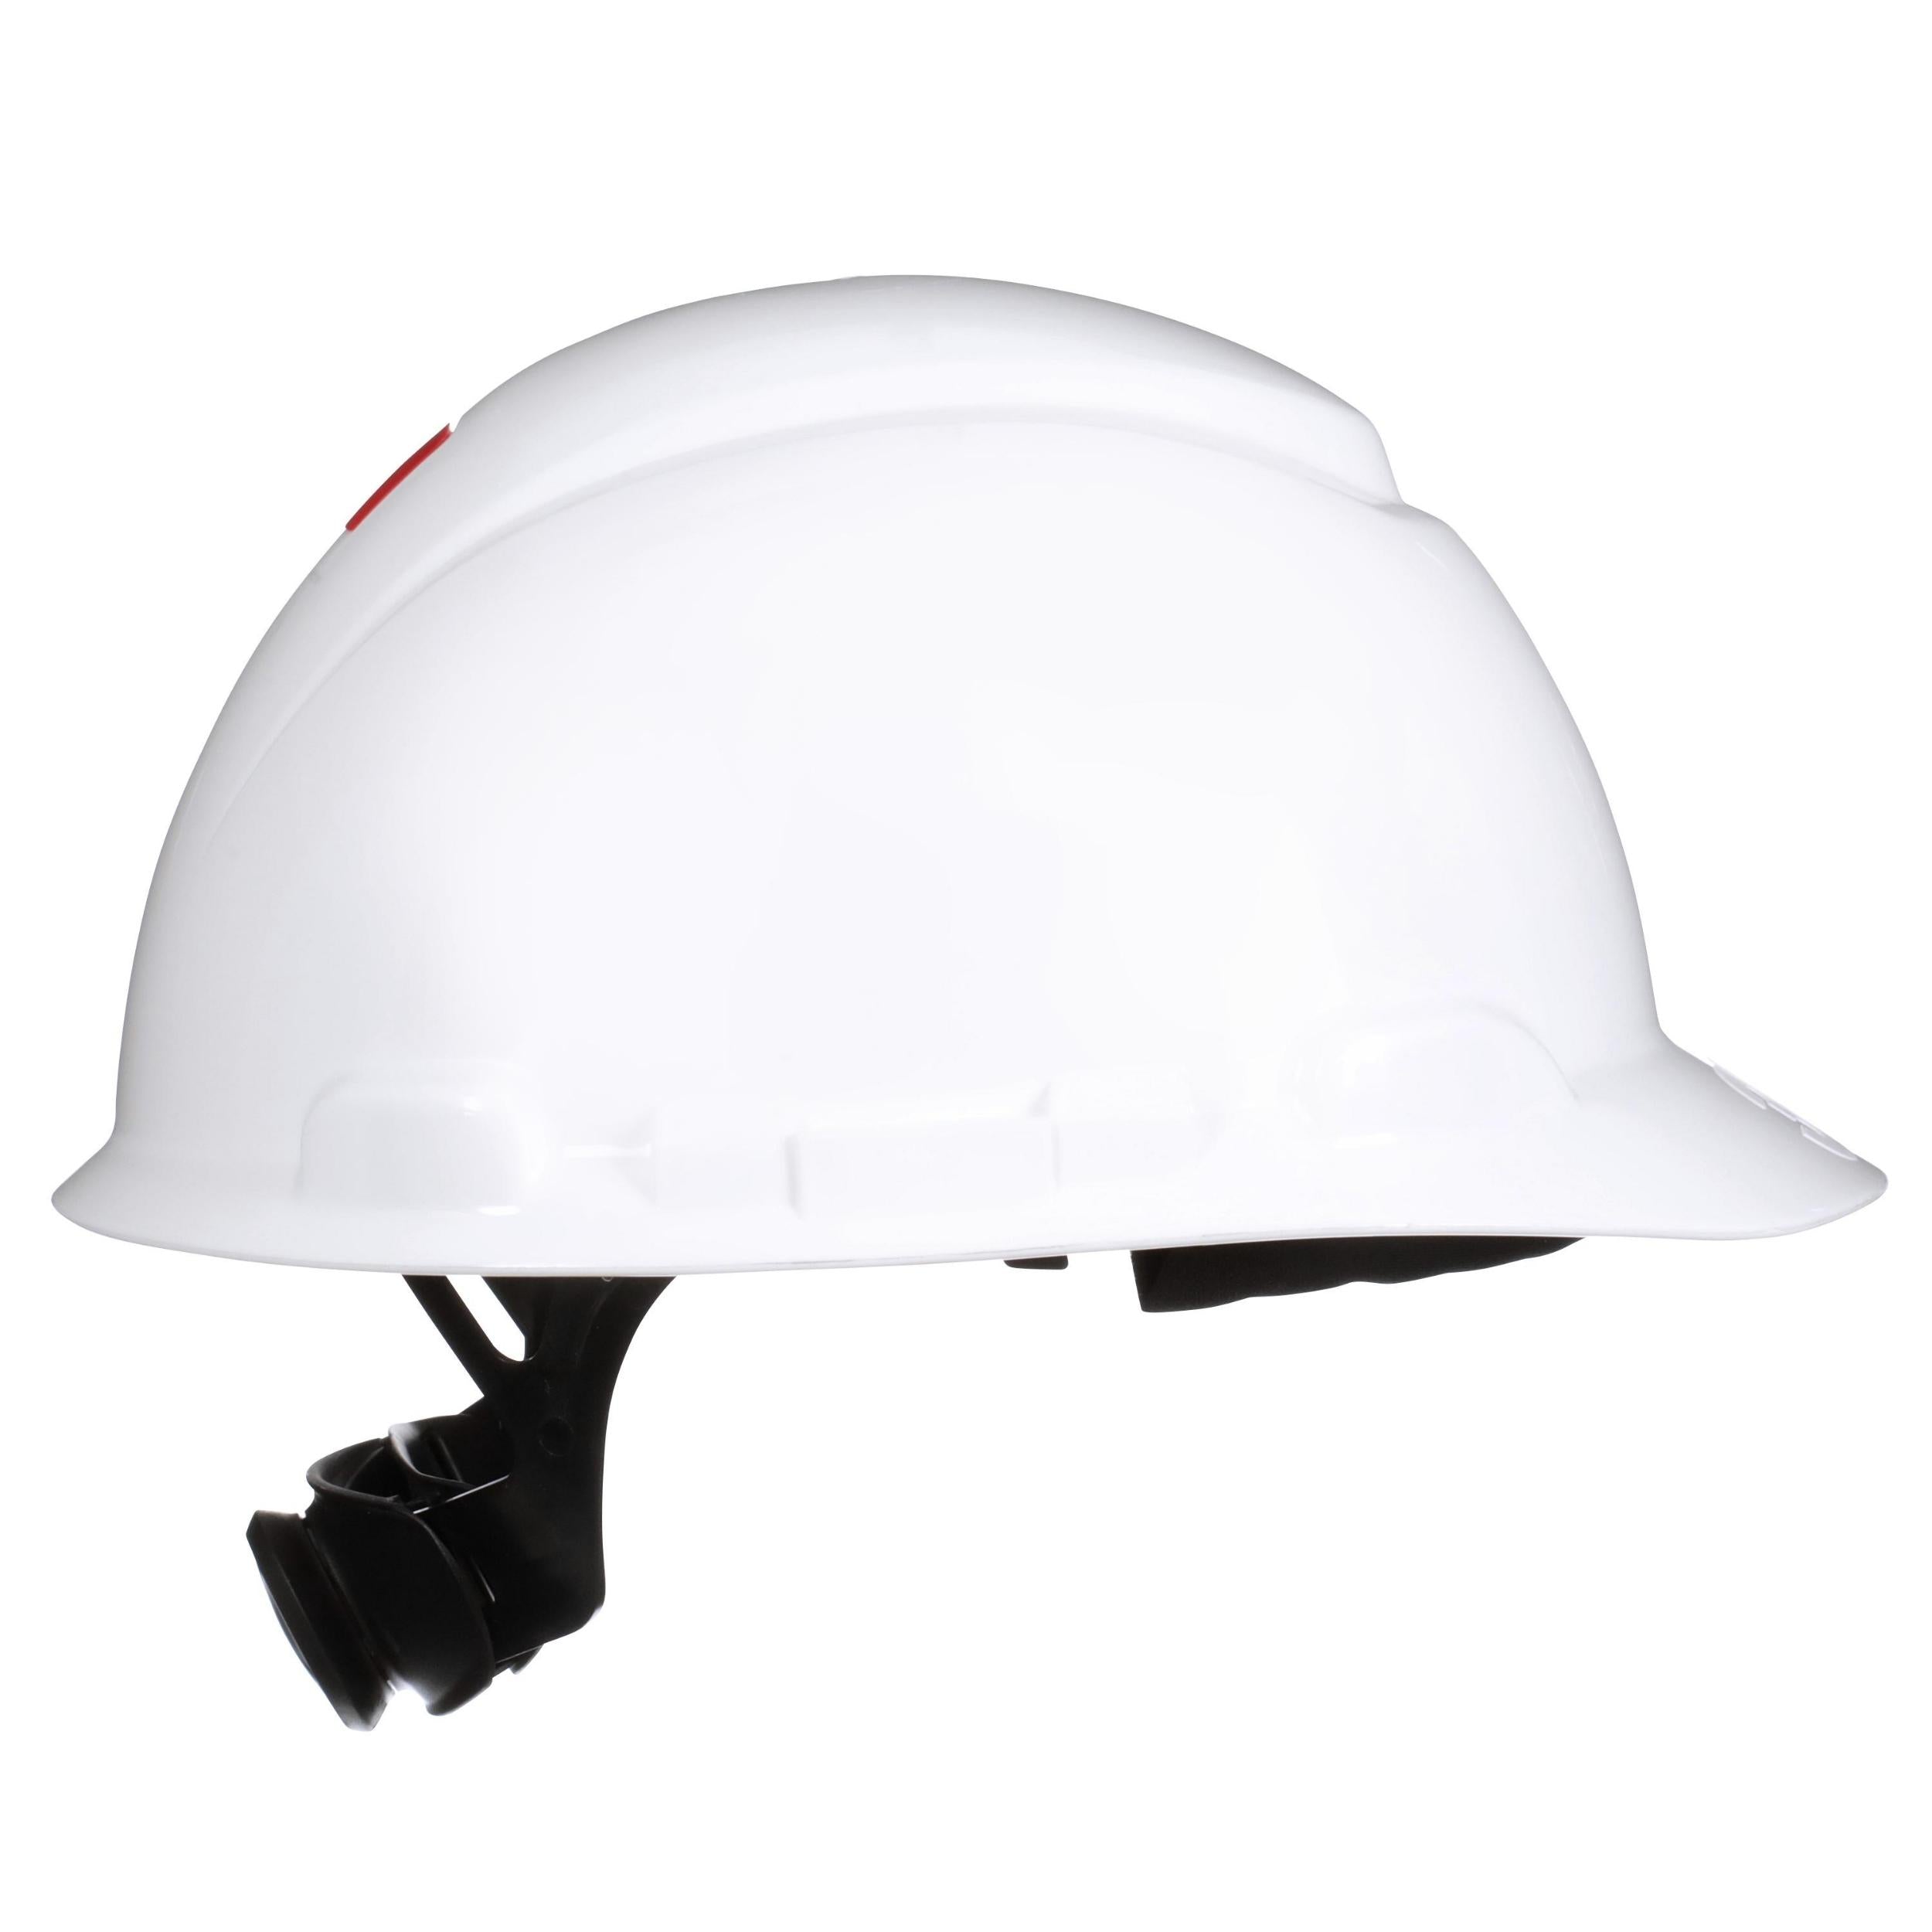 3M™ SecureFit™ Hard Hat H-701SFR-UV, White, 4-Point Pressure Diffusion Ratchet Suspension, with Uvicator